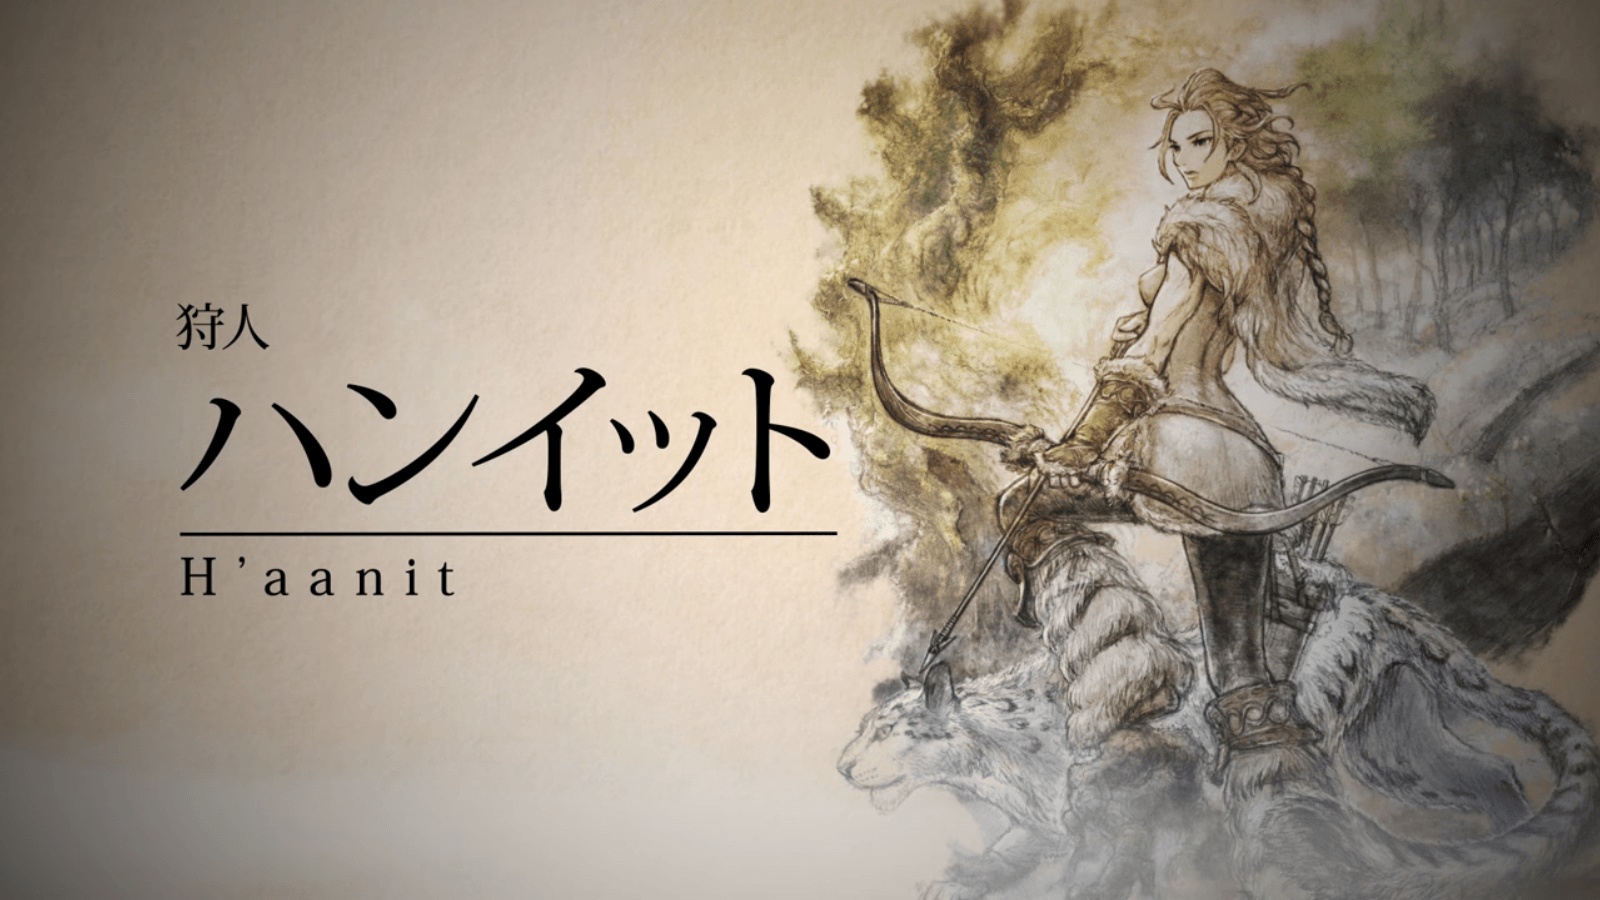 Octopath Traveler: April overview video introduces H'aanit